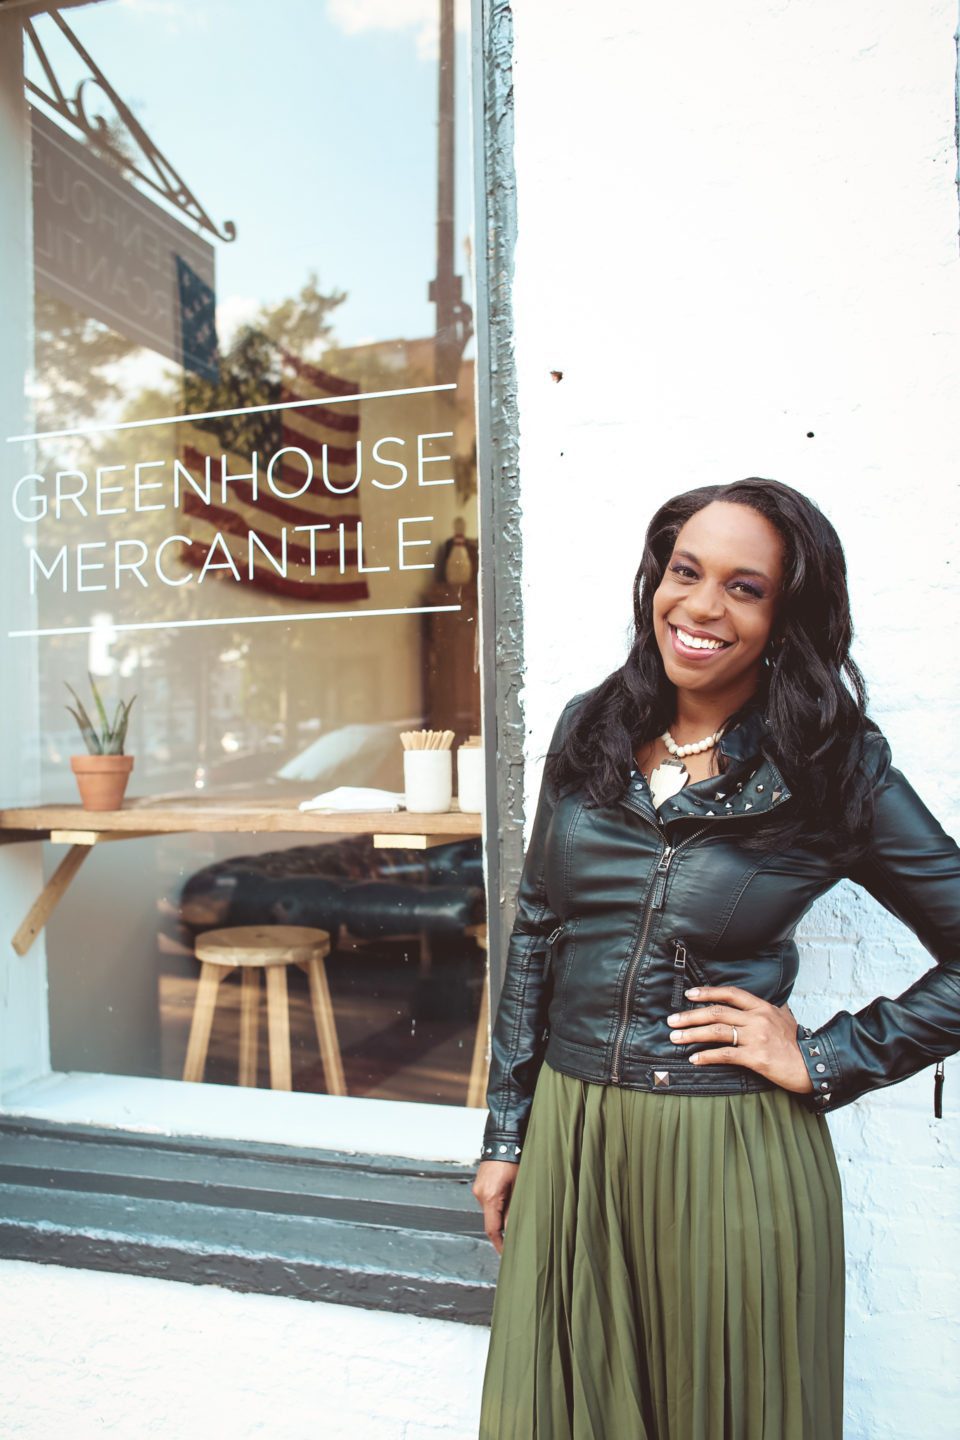 Newnan, GA Shop Owner and The Story Behind Greenhouse Mercantile